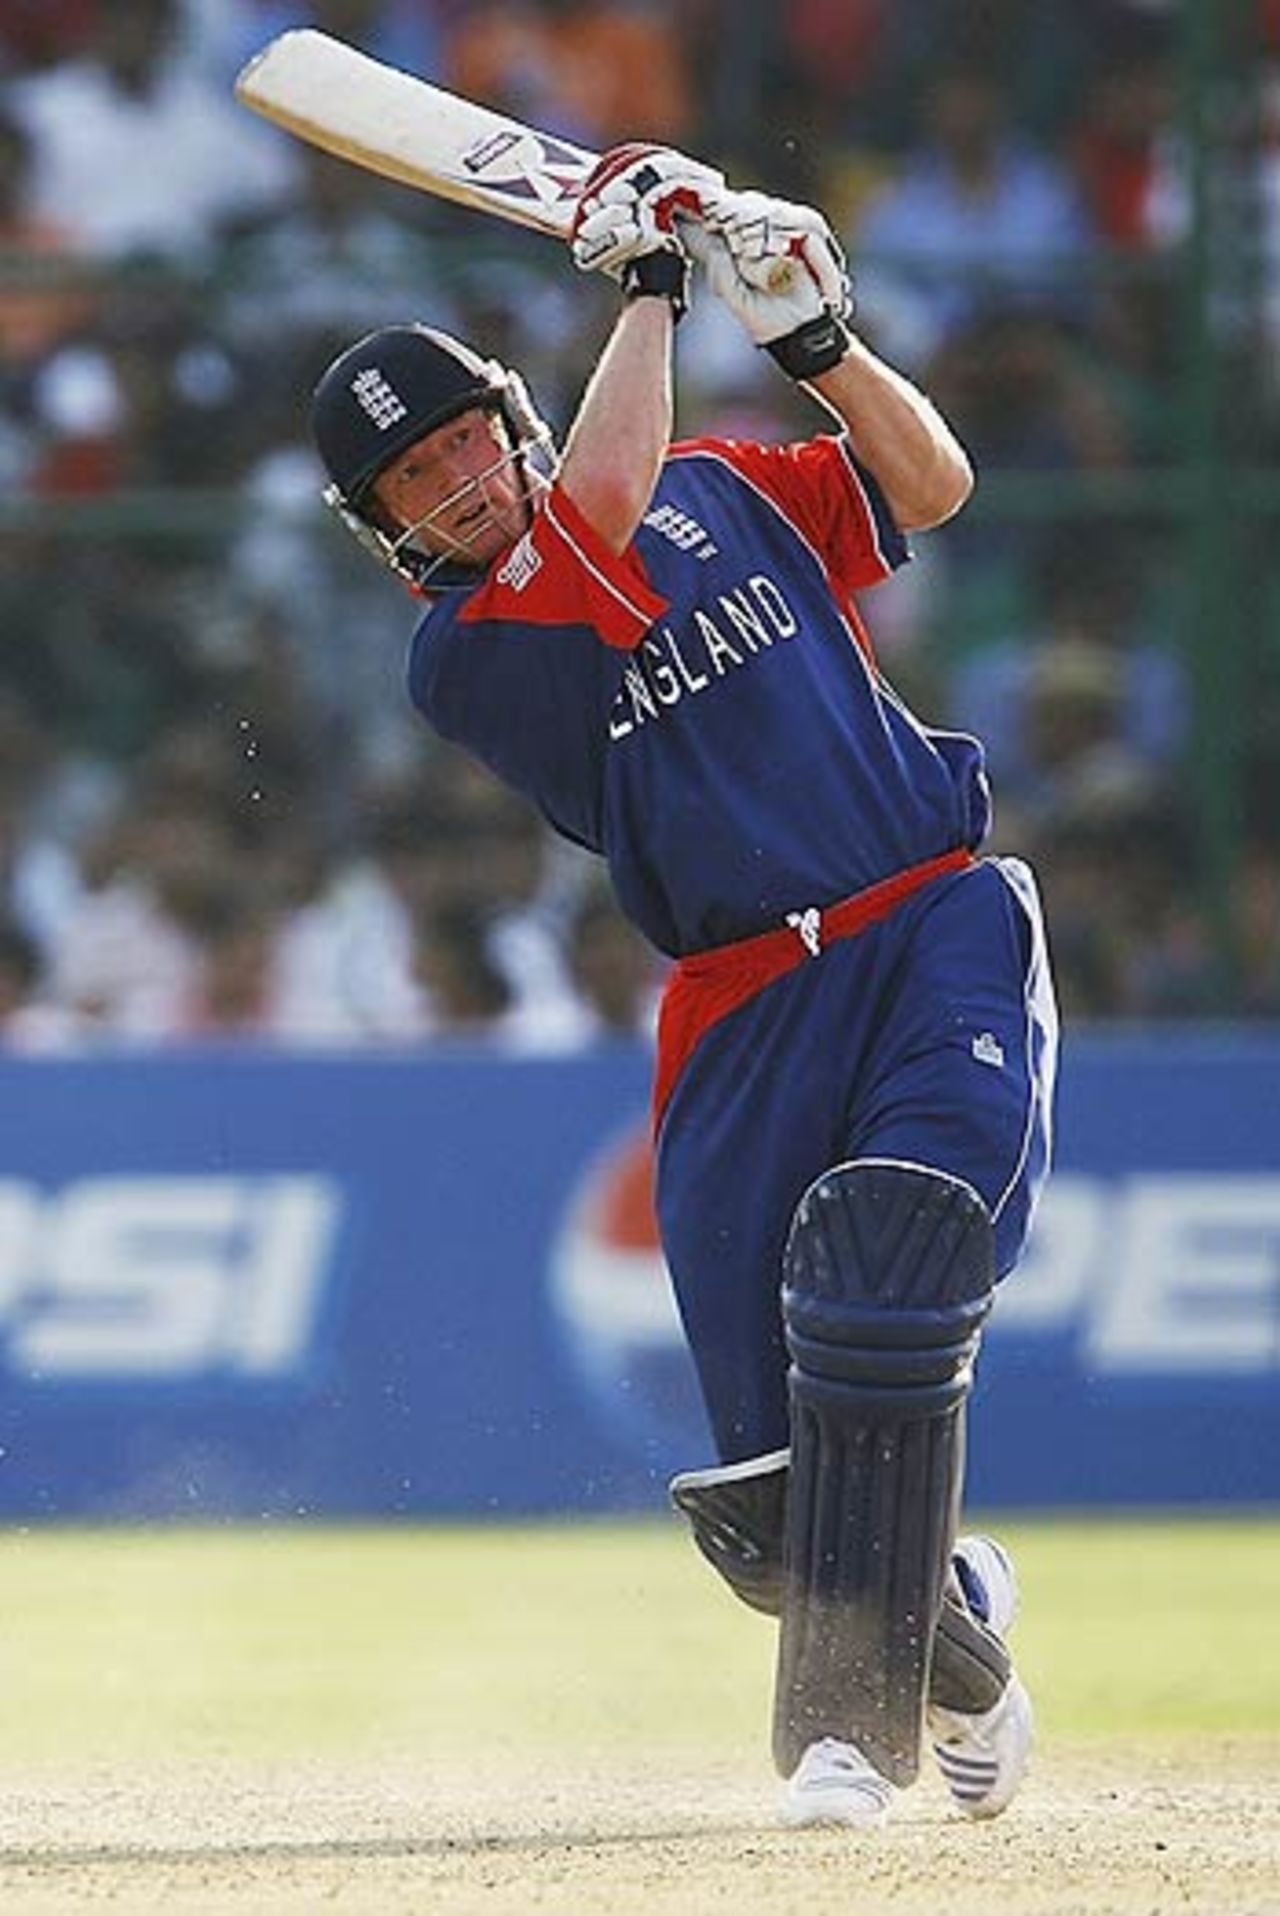 Paul Collingwood top-scored with 38 out of a dismal total of 125, India v England, 1st match, Champions Trophy, Sawai Mansingh Stadium, Jaipur, October 15, 2006